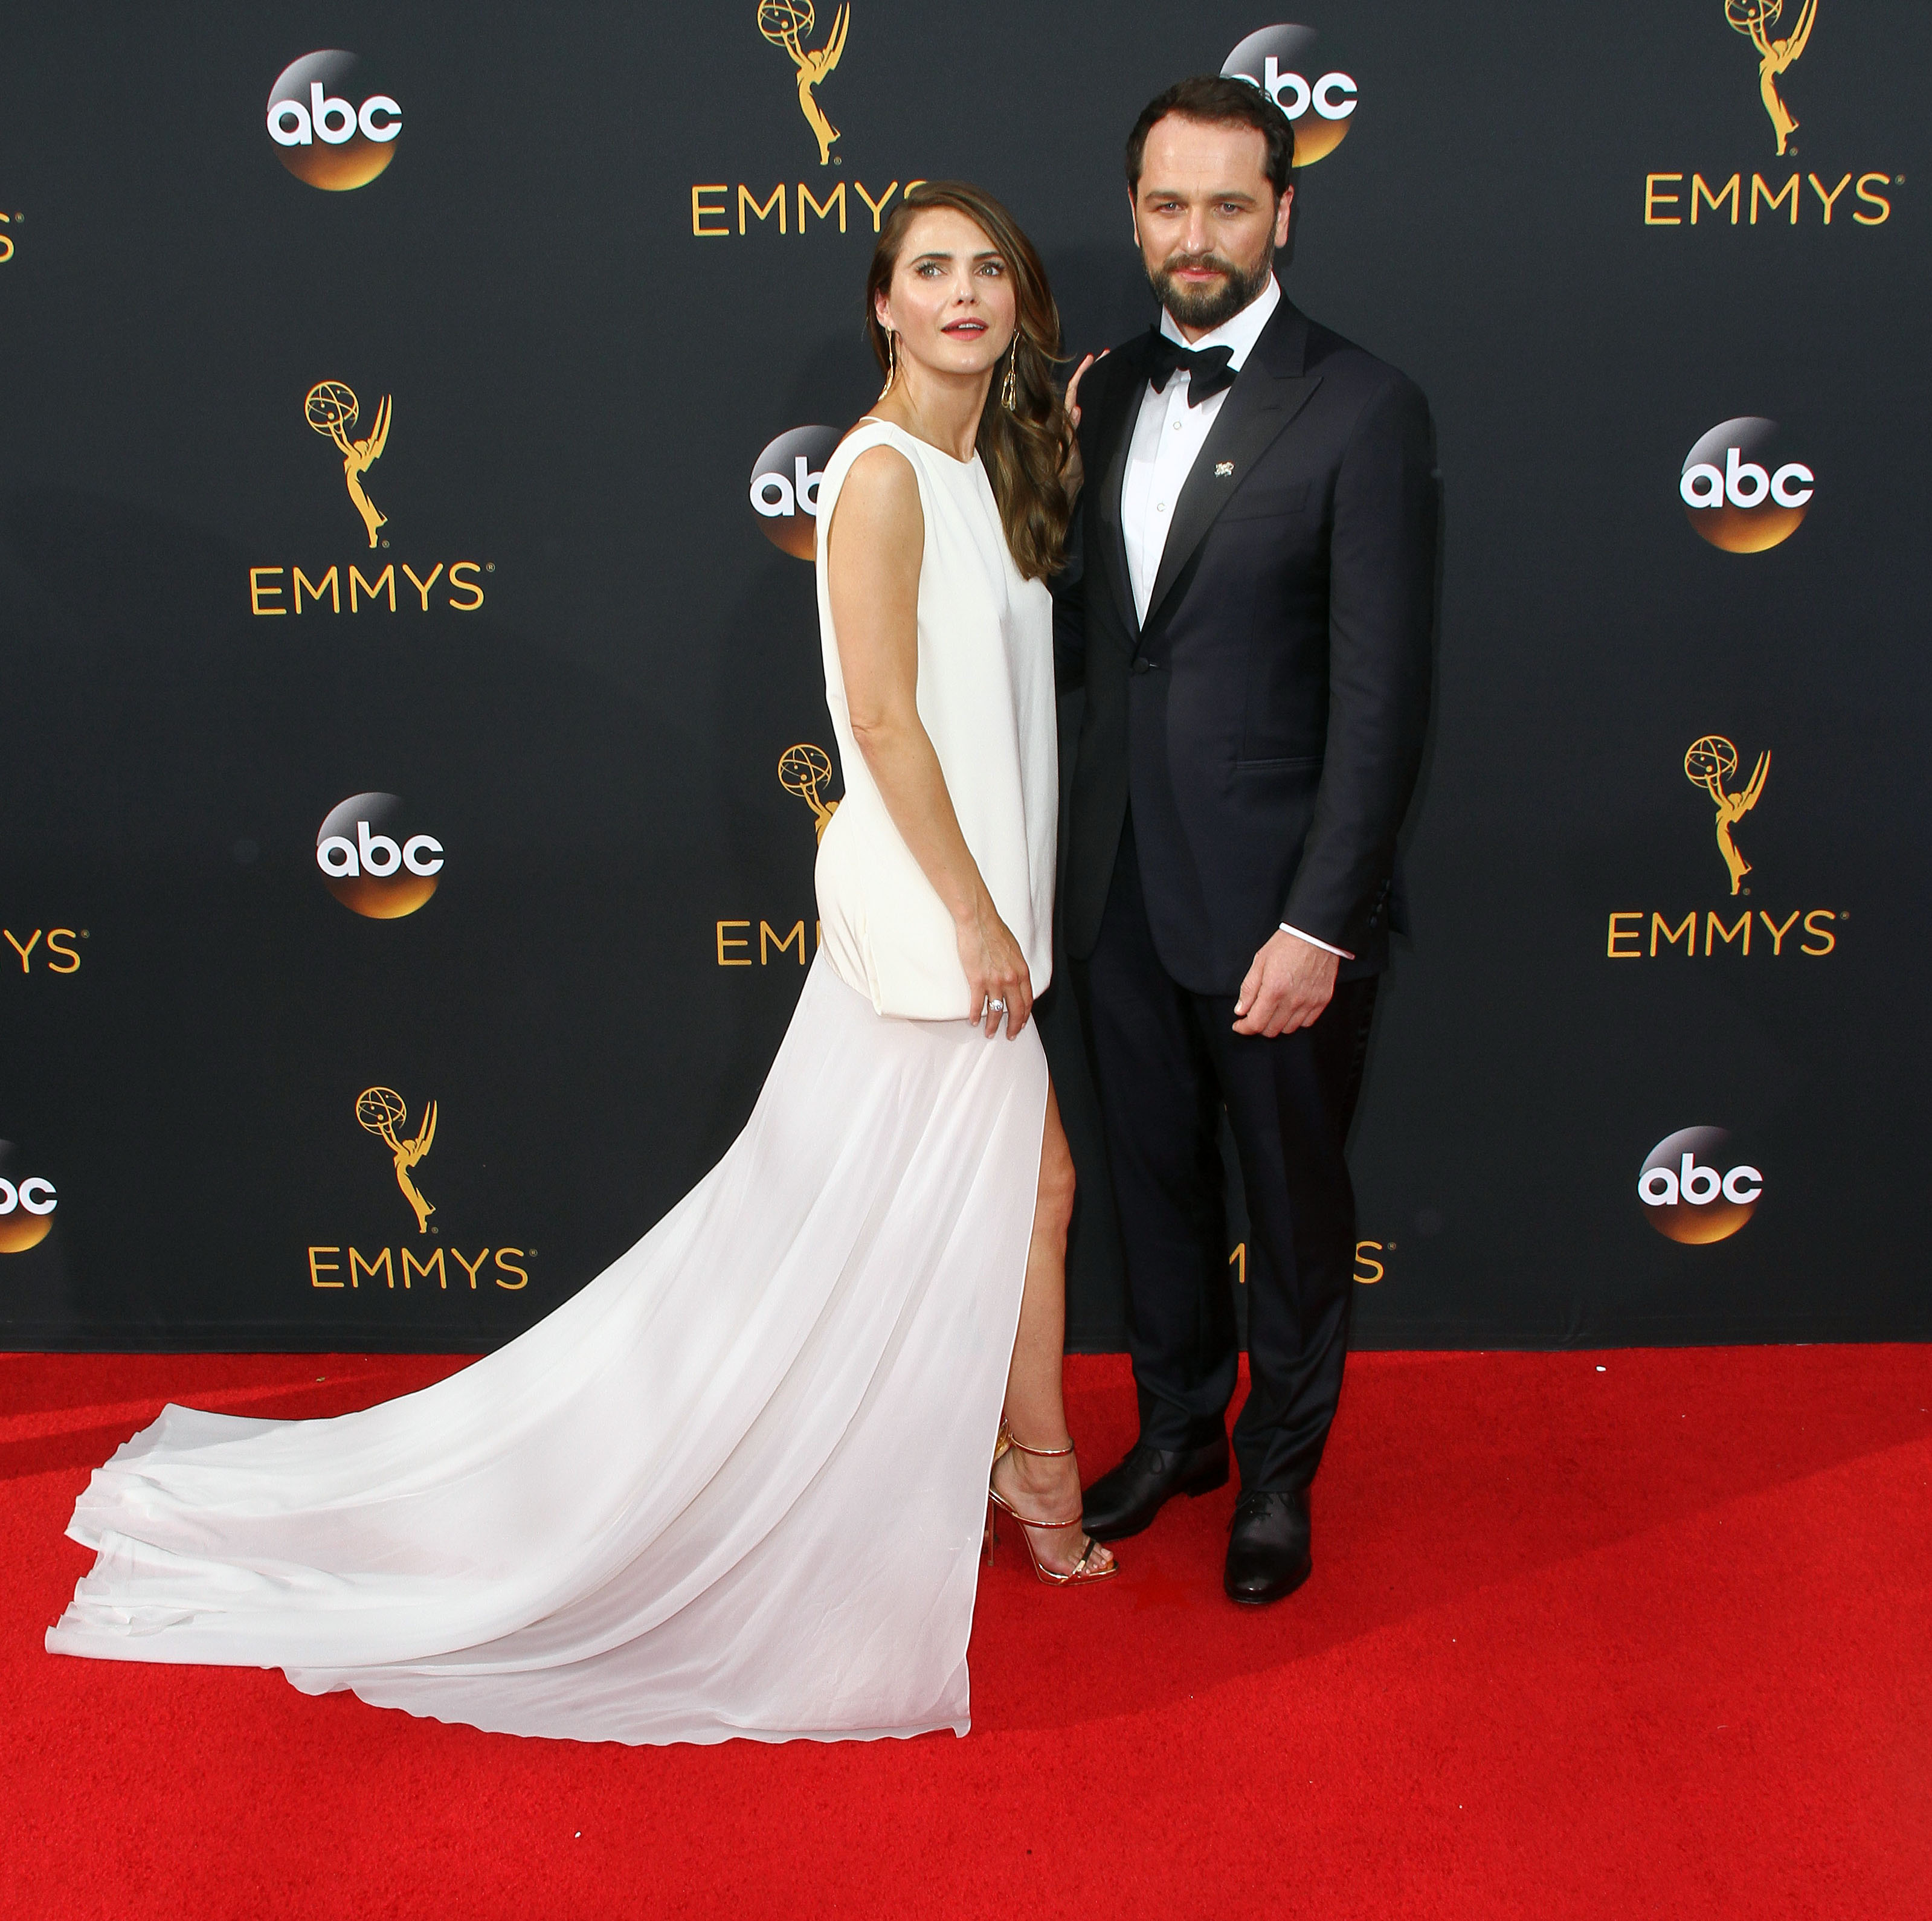 Emmys Fug Carpet: Keri Russell in Stephane Rolland